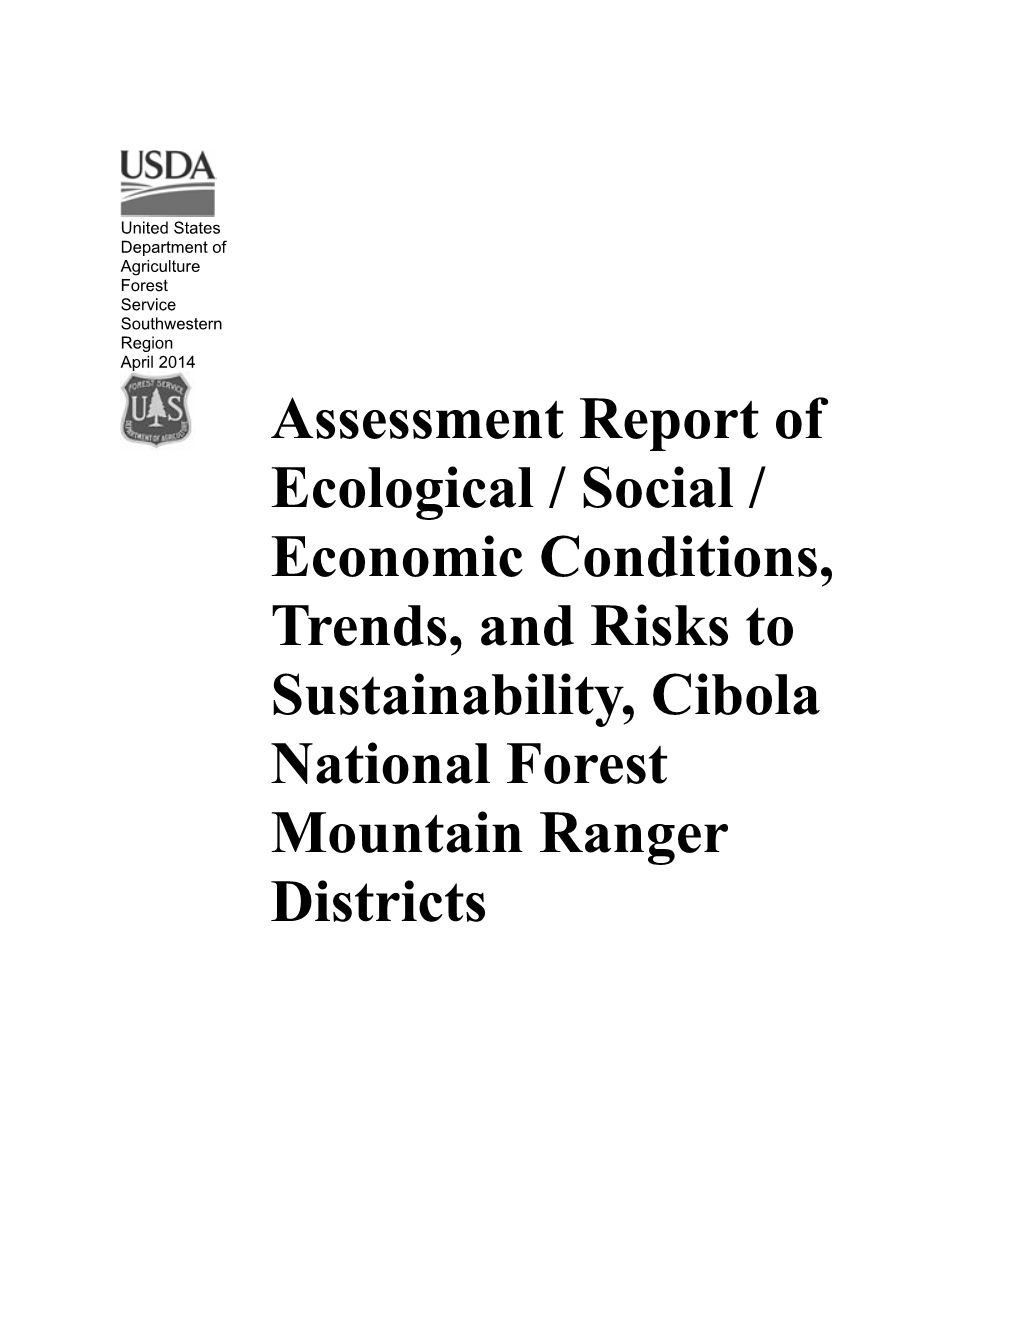 Assessment Report of Ecological / Social / Economic Conditions, Trends, and Risks to Sustainability, Cibola National Forest Mountain Ranger Districts